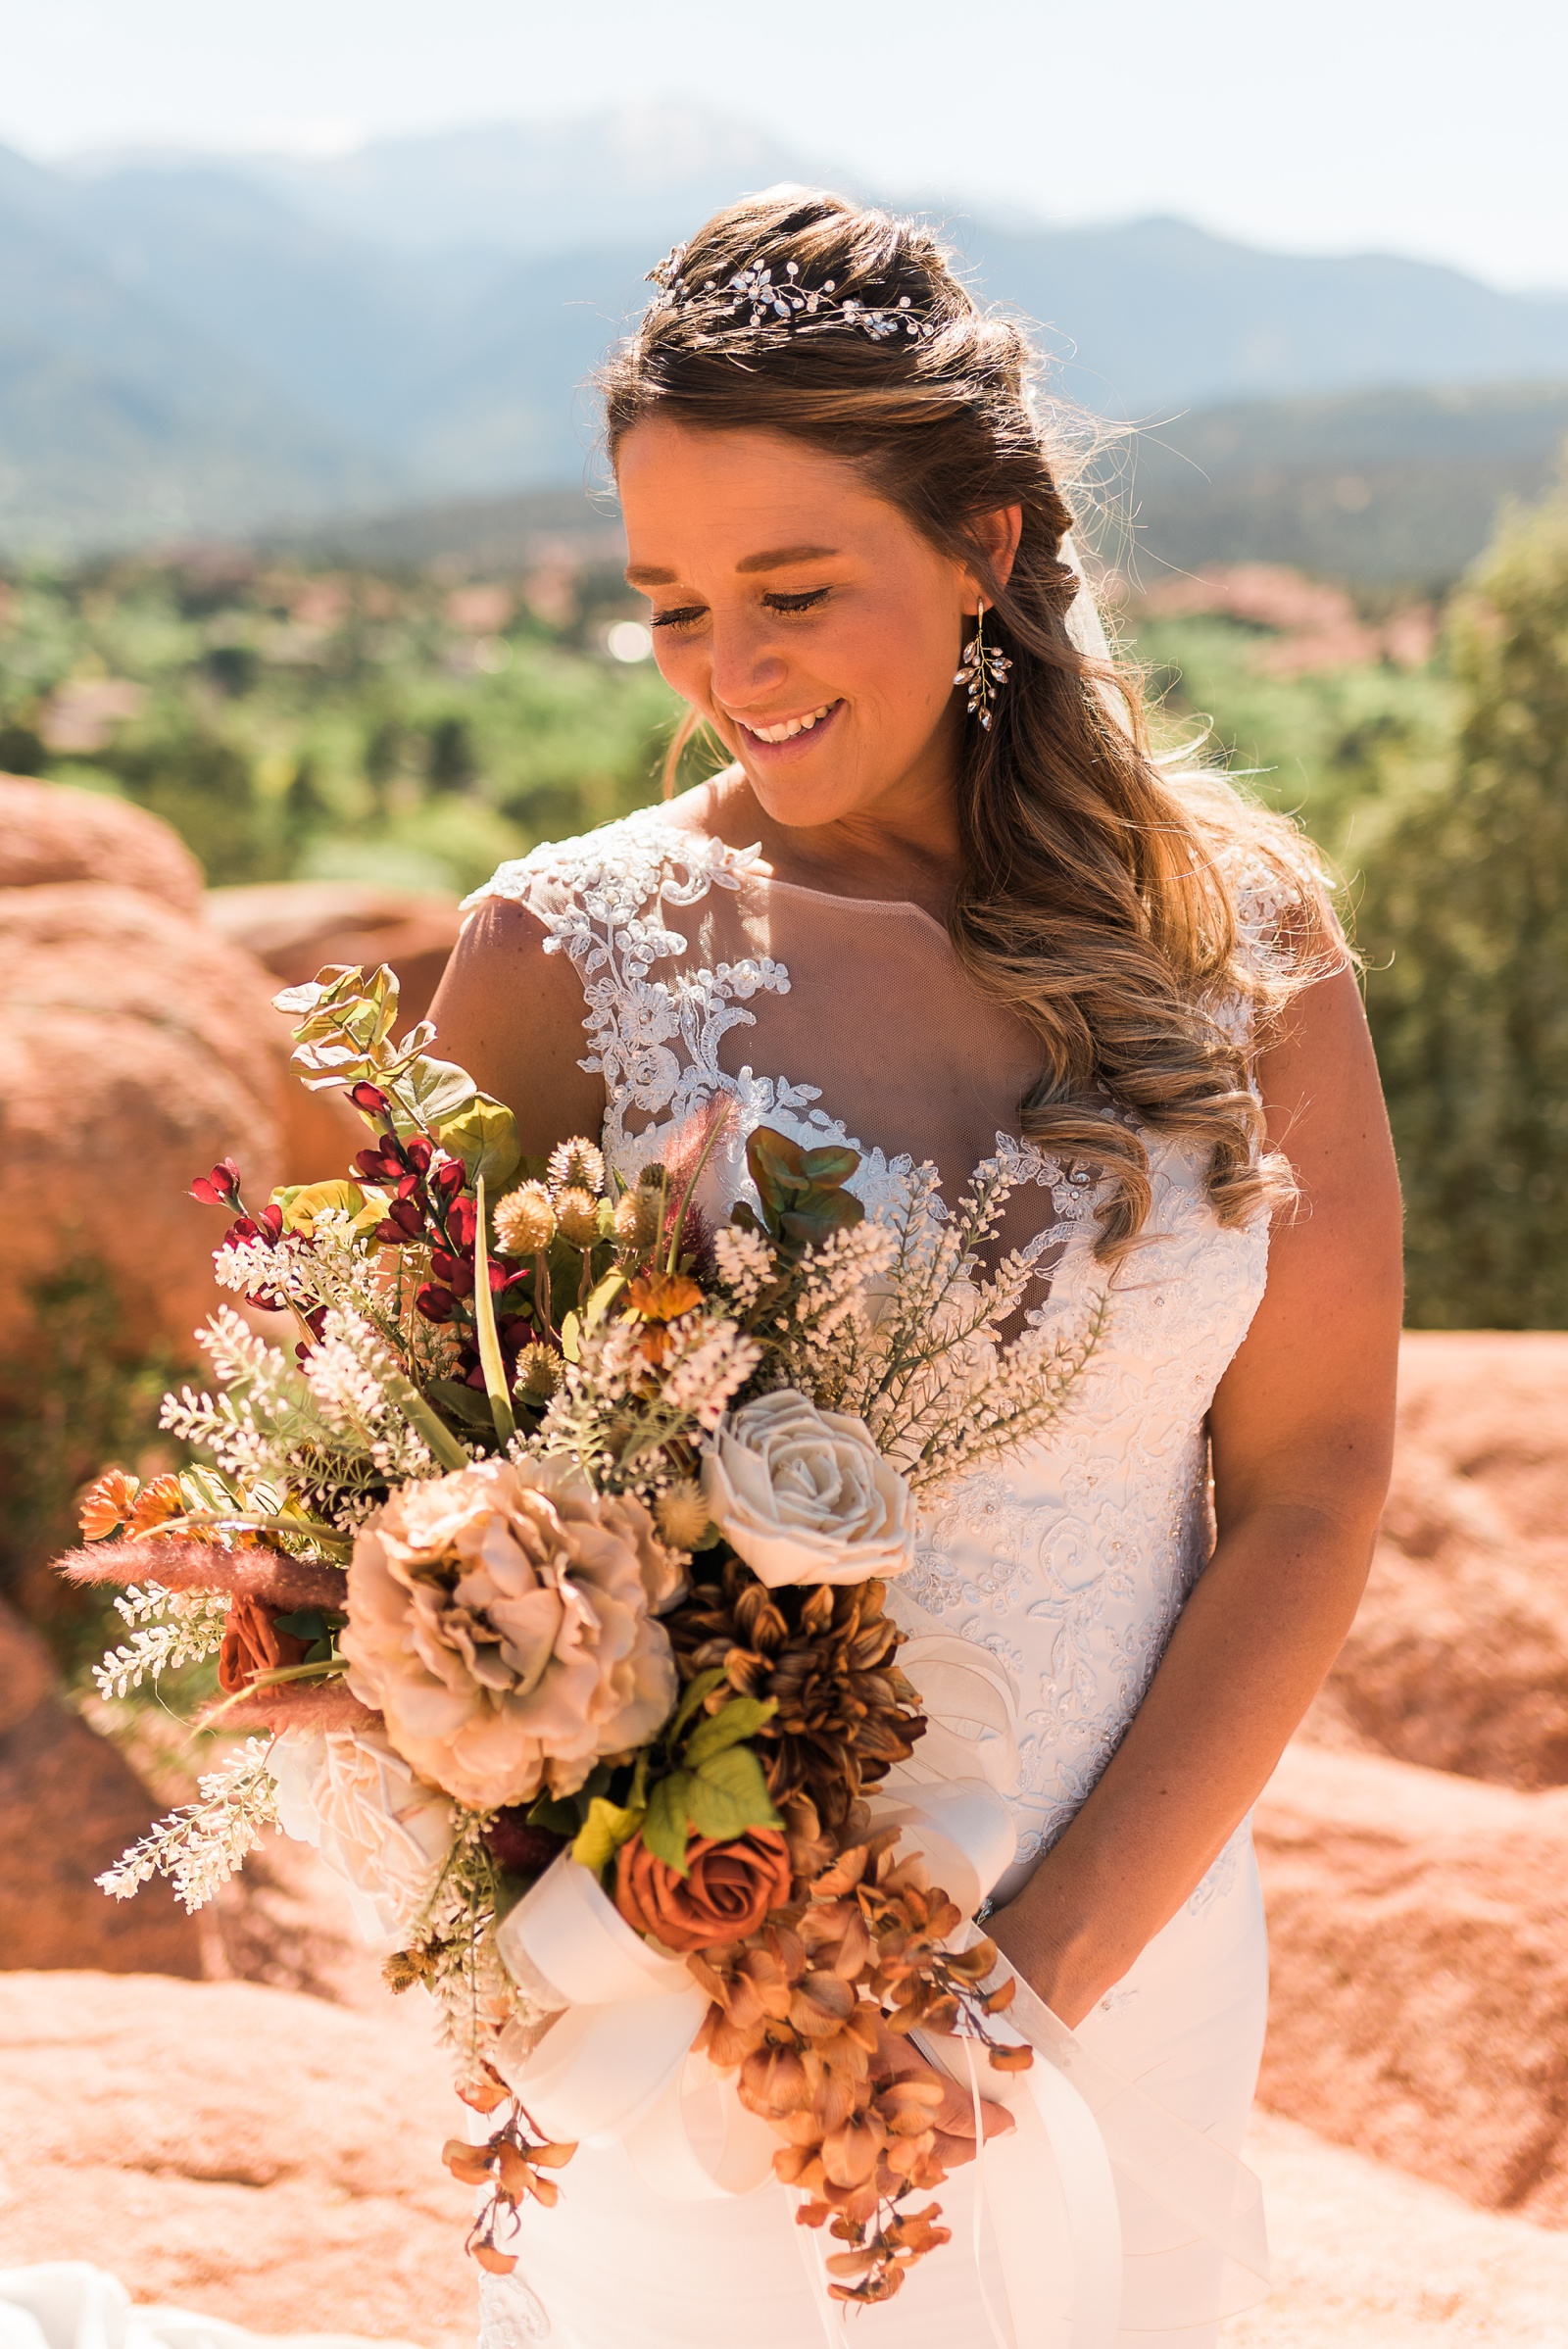 Bride smiling and looking down at flowers